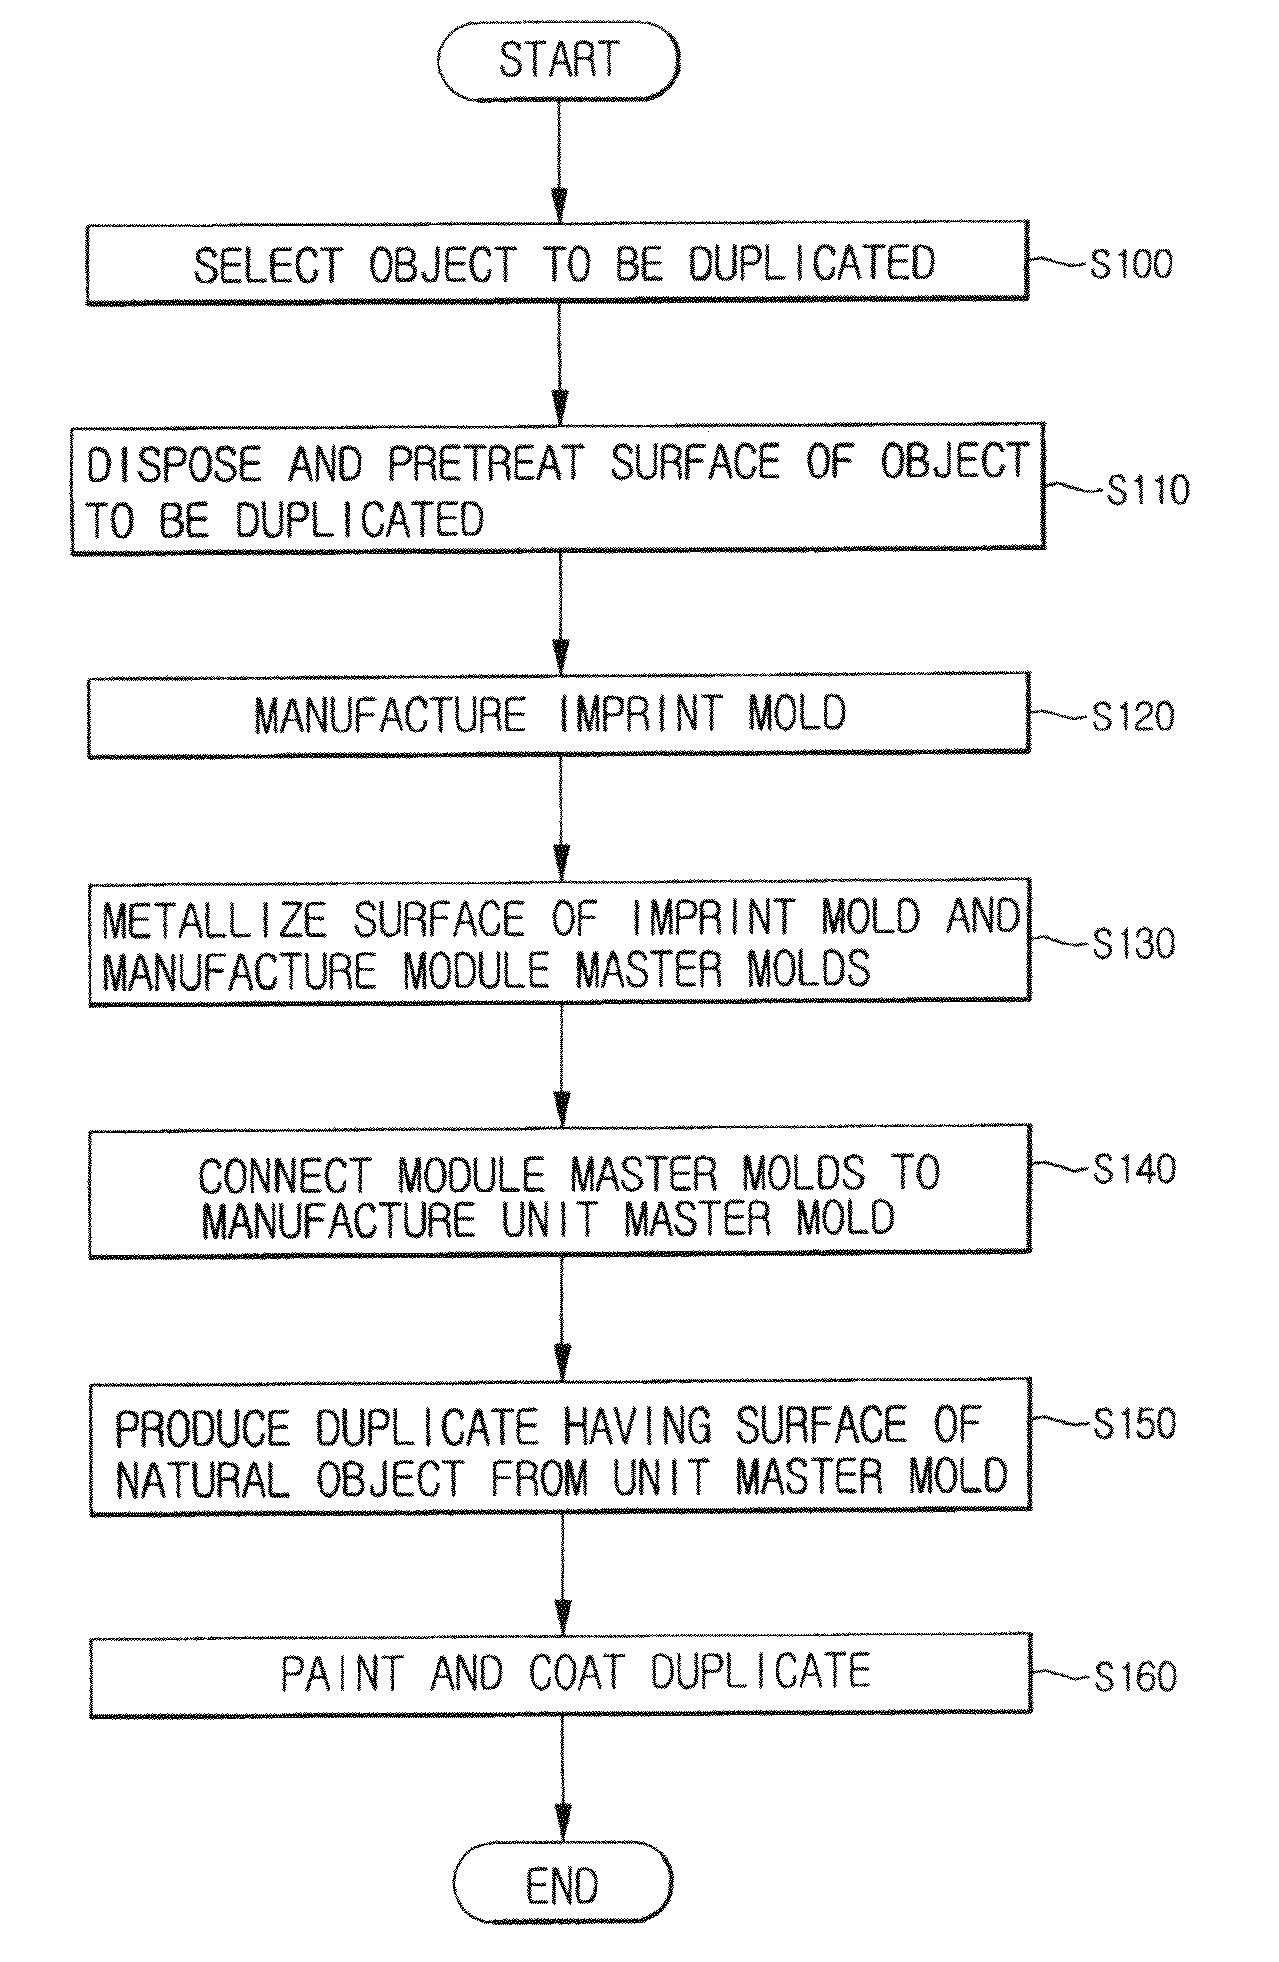 Method of duplicating nano pattern texture on object's surface by nano imprinting and electroforming